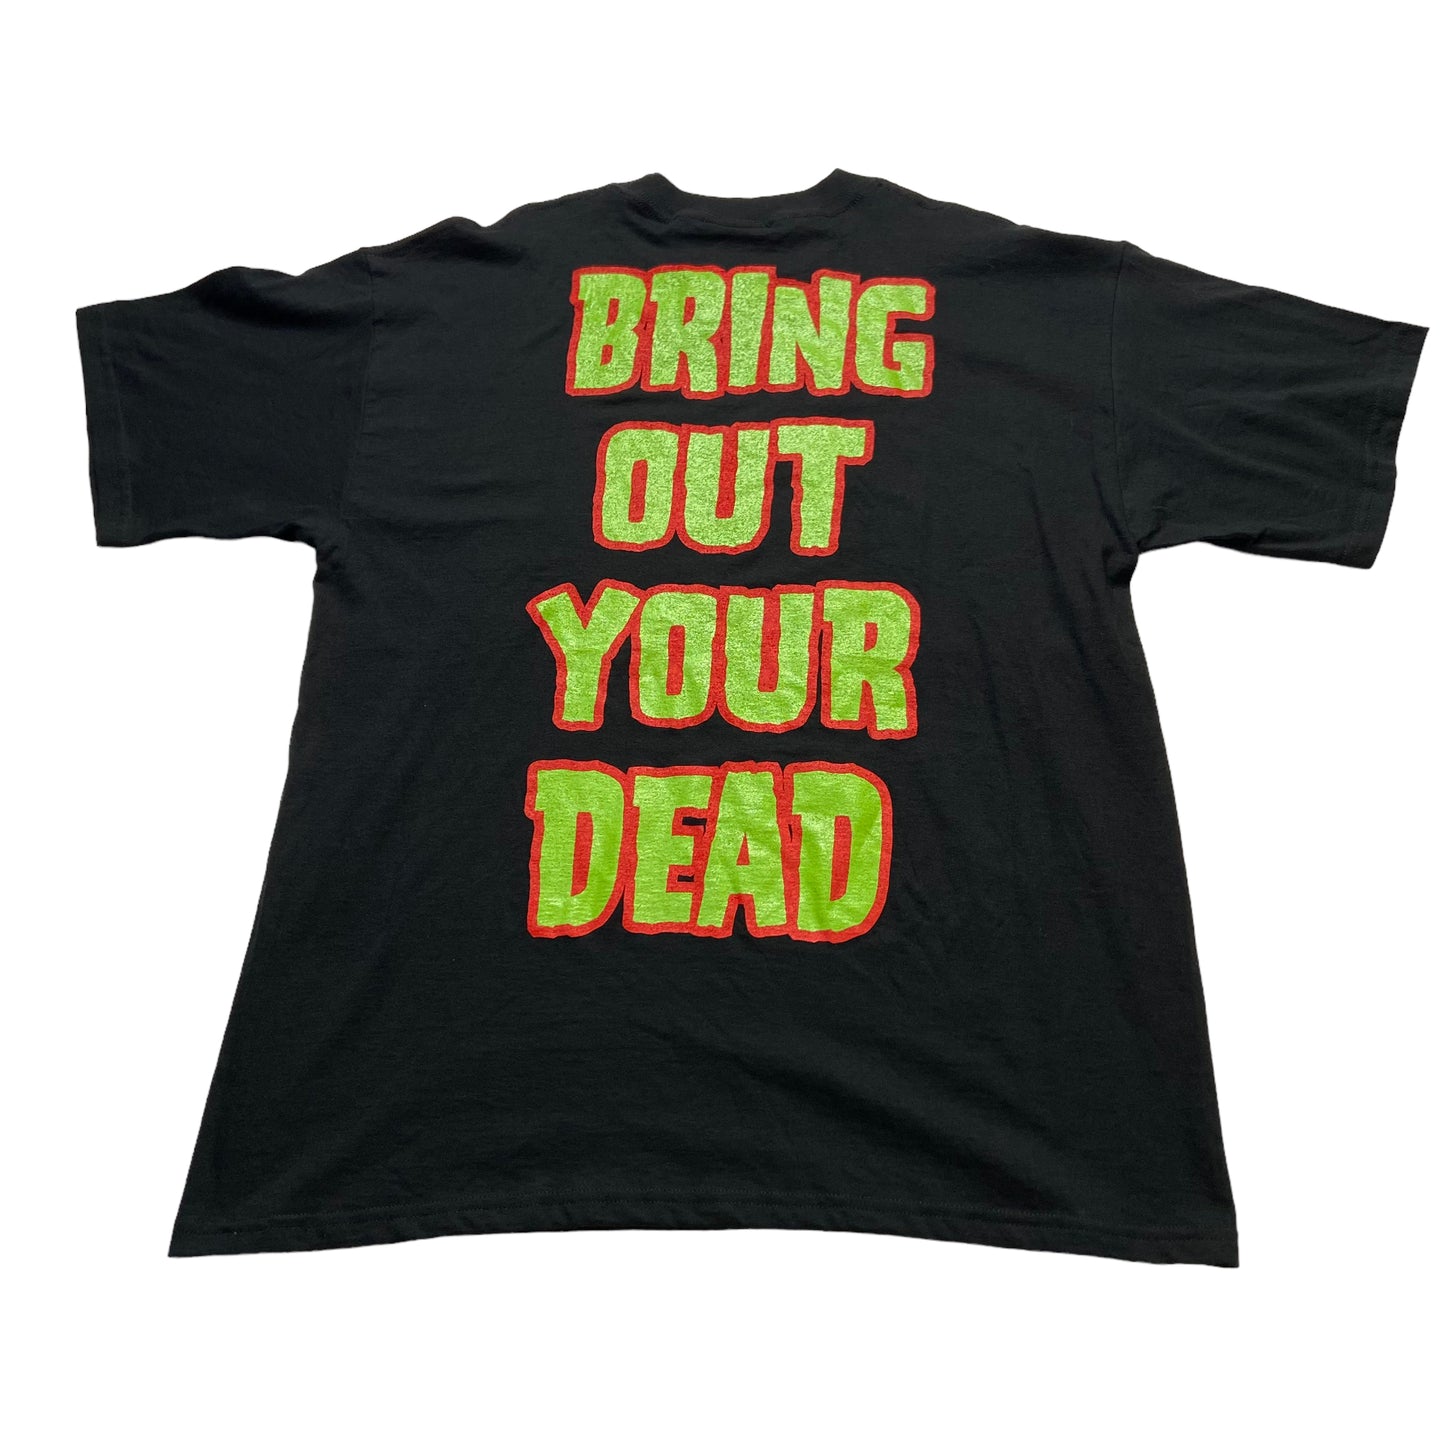 Vintage 1999 Rob Zombie "Bring Out Your Dead" T-shirt XL